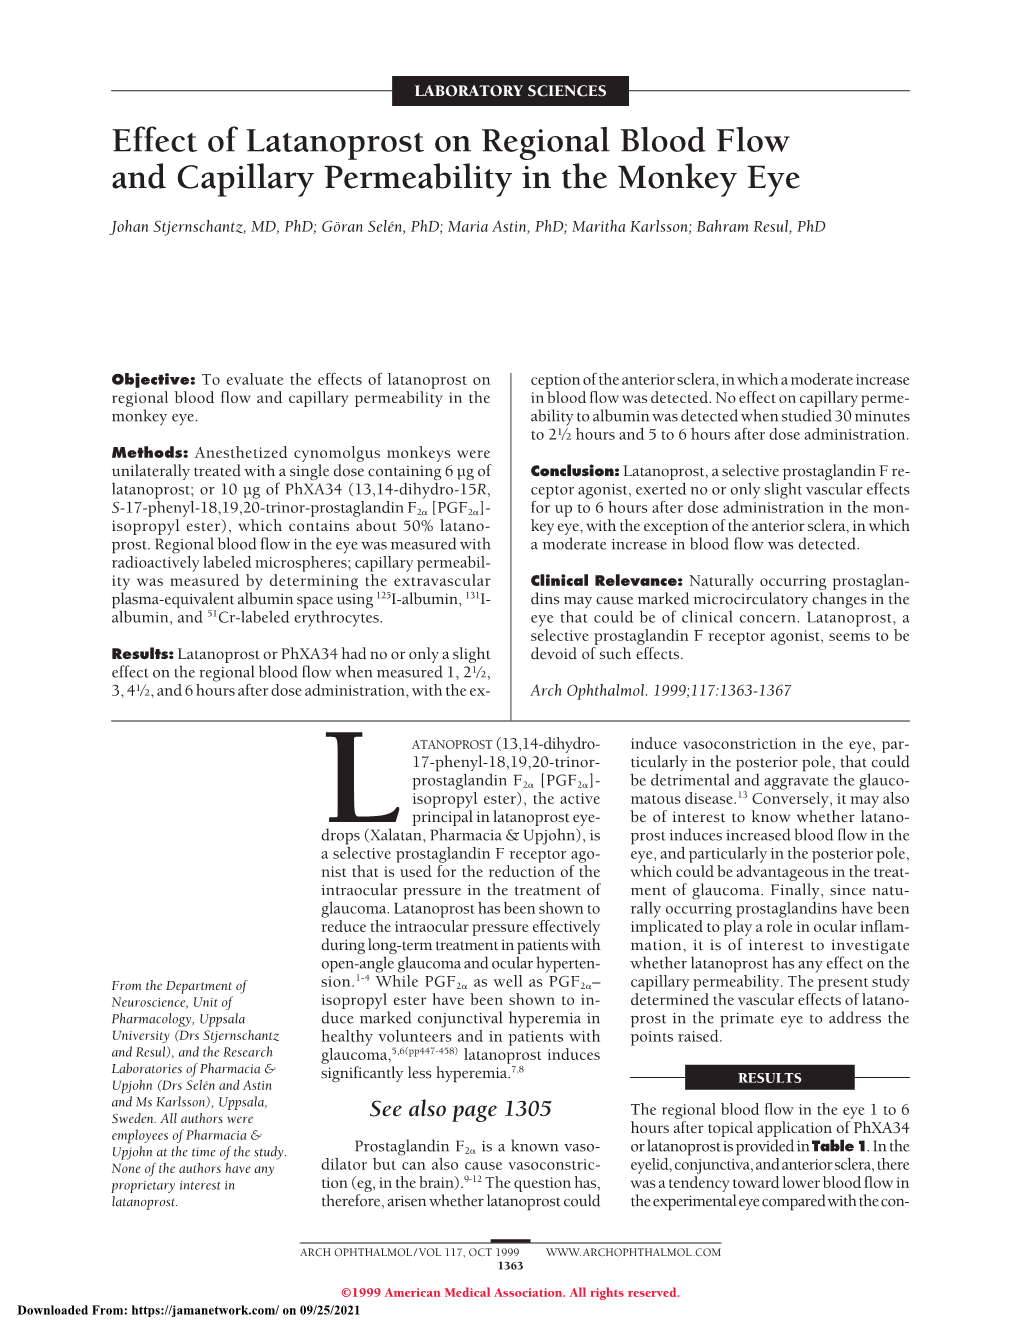 Effect of Latanoprost on Regional Blood Flow and Capillary Permeability in the Monkey Eye